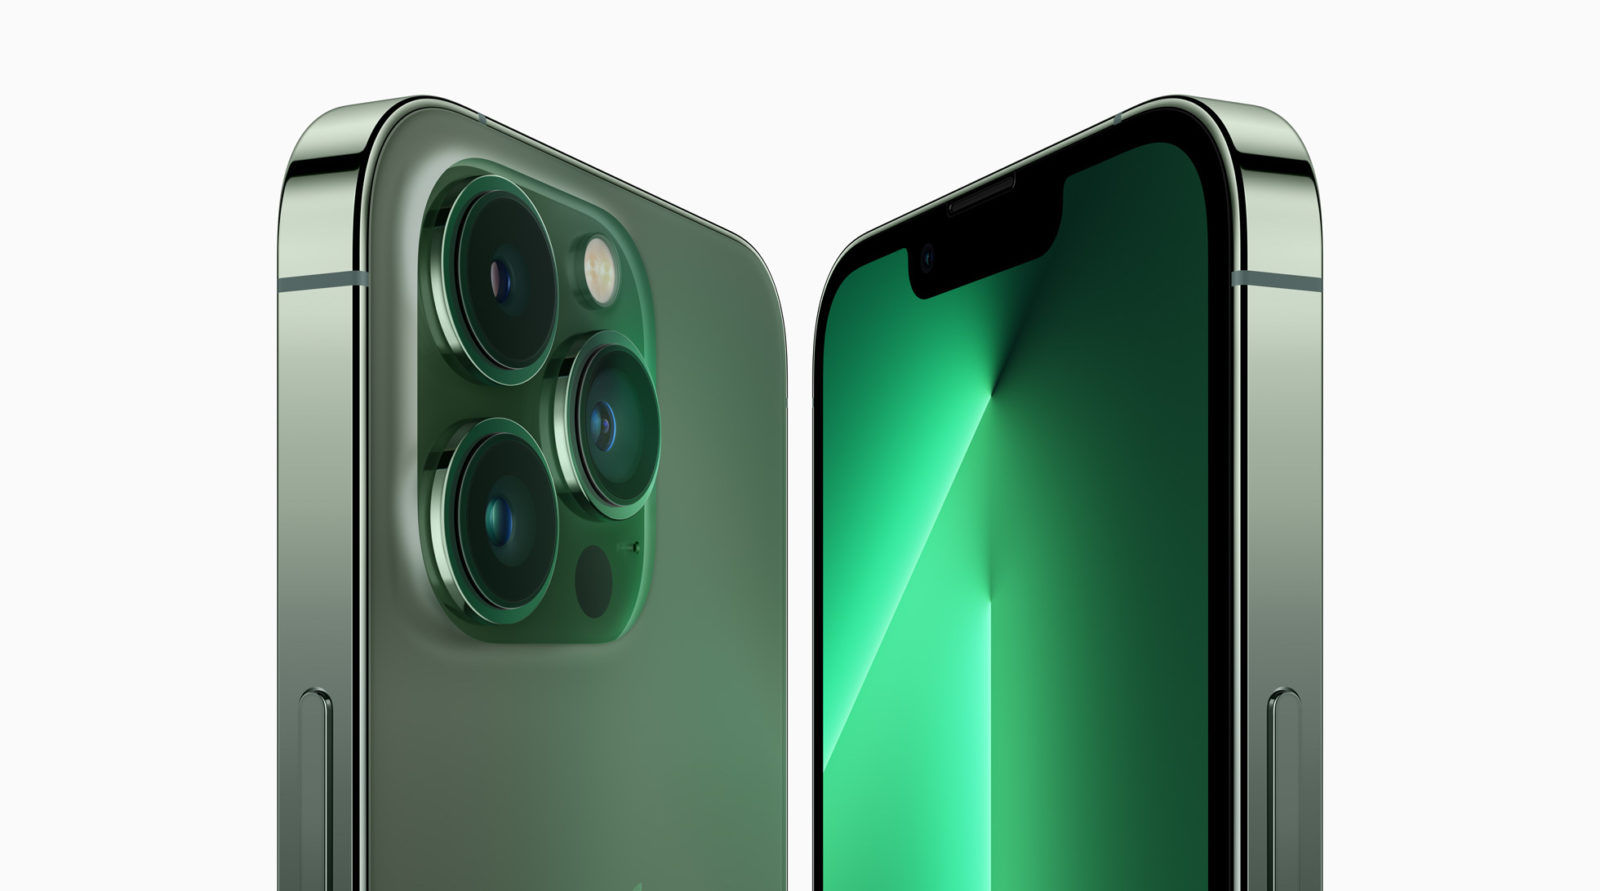 New iPhone 13 in Green, iPad Air, and More: All the new Apple Products for 2022